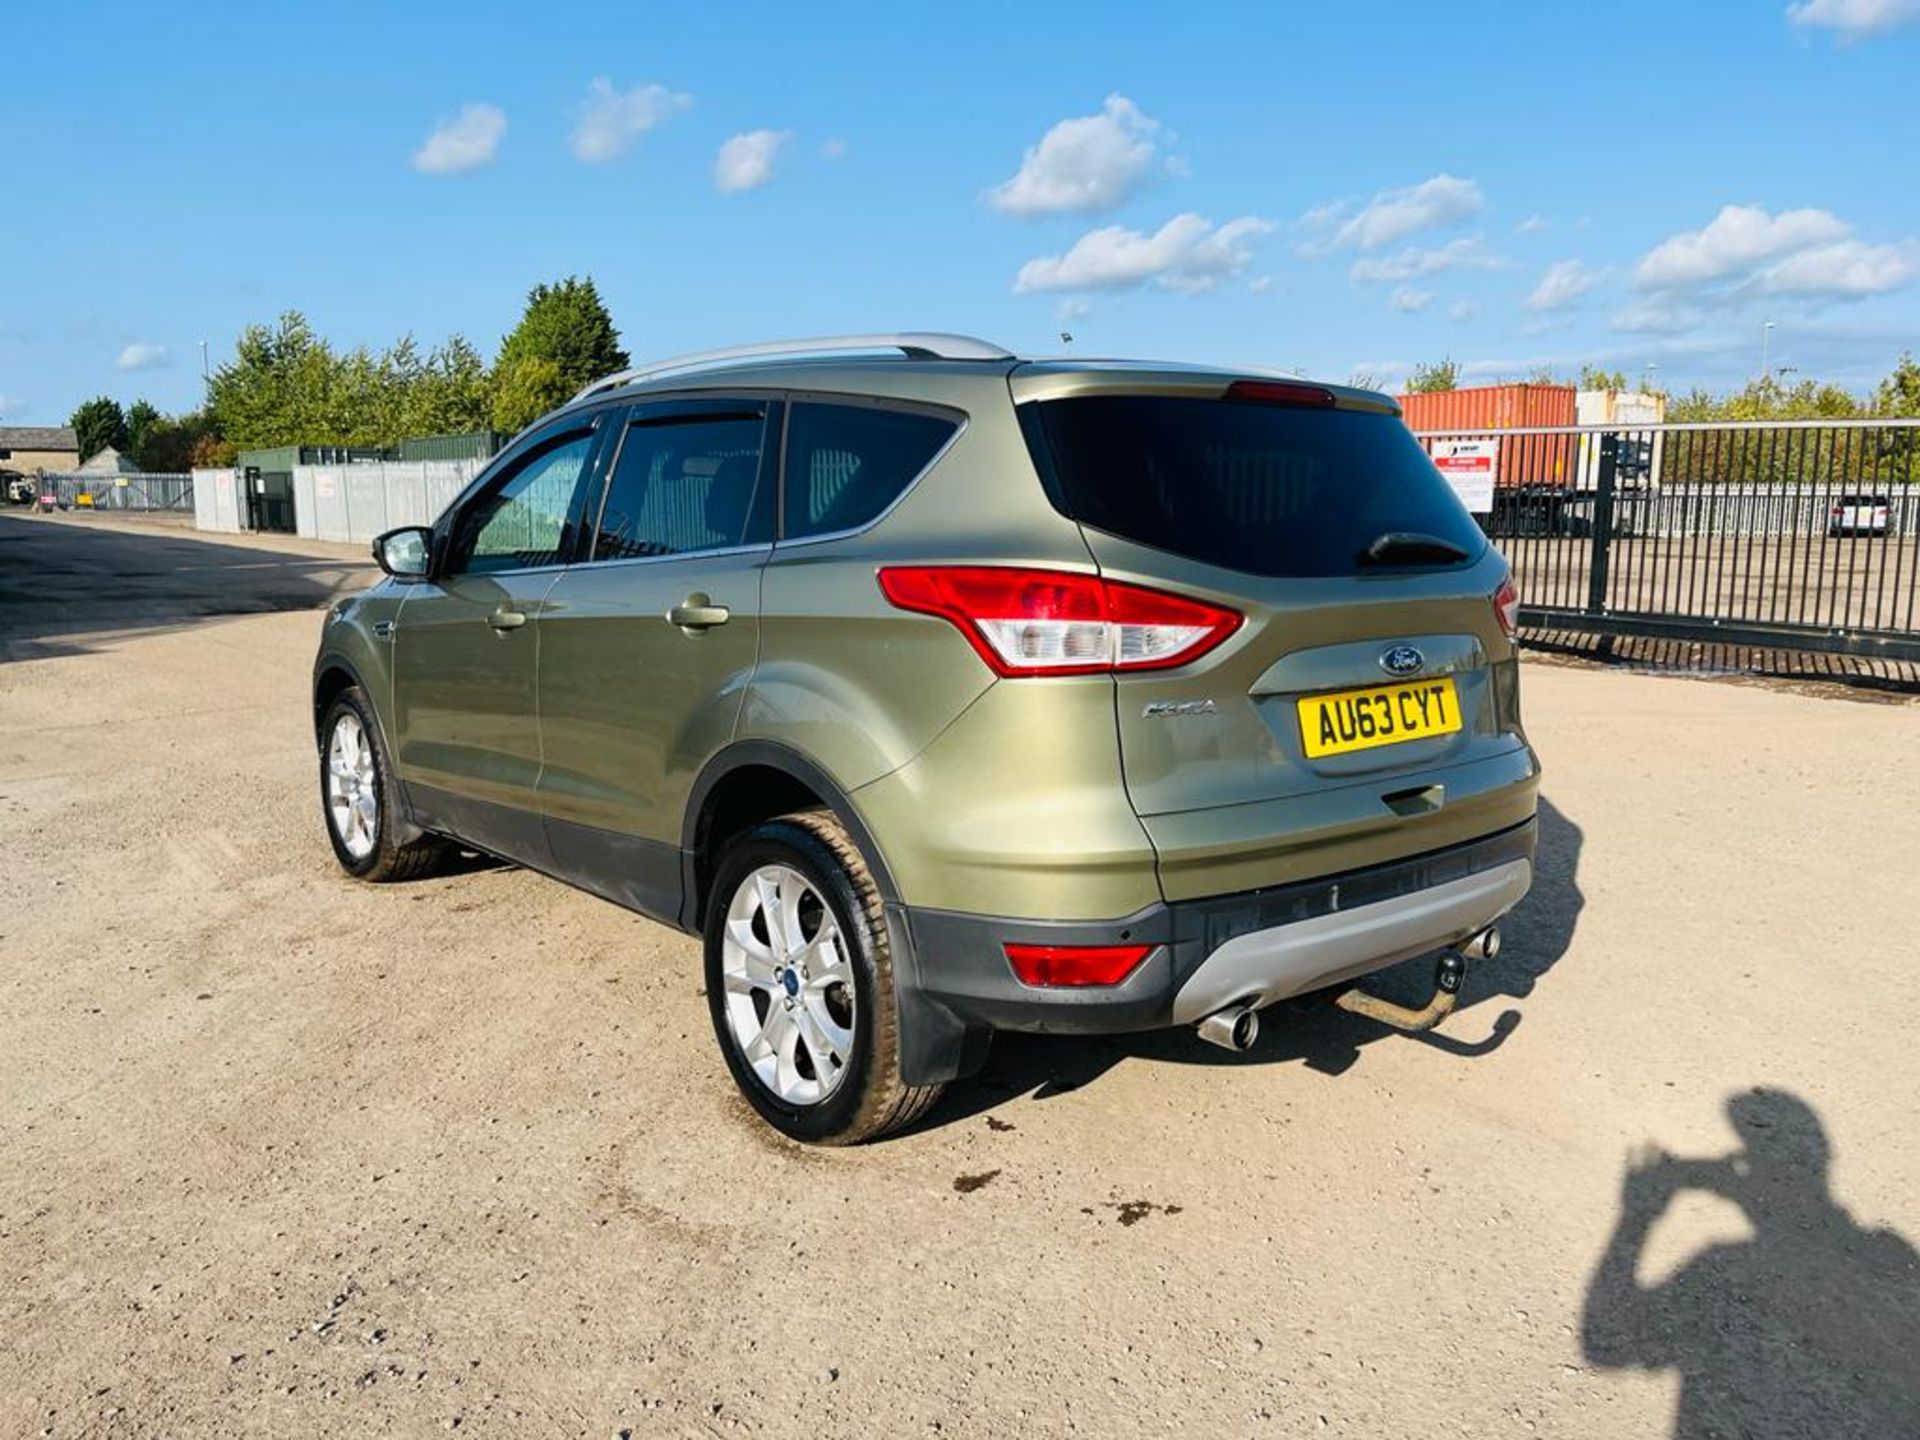 ** ON SALE ** Ford Kuga 2.0 TDCI 163 4WD Titanium 2013 (63 Reg) - No Vat - Air Conditioning - Image 10 of 32